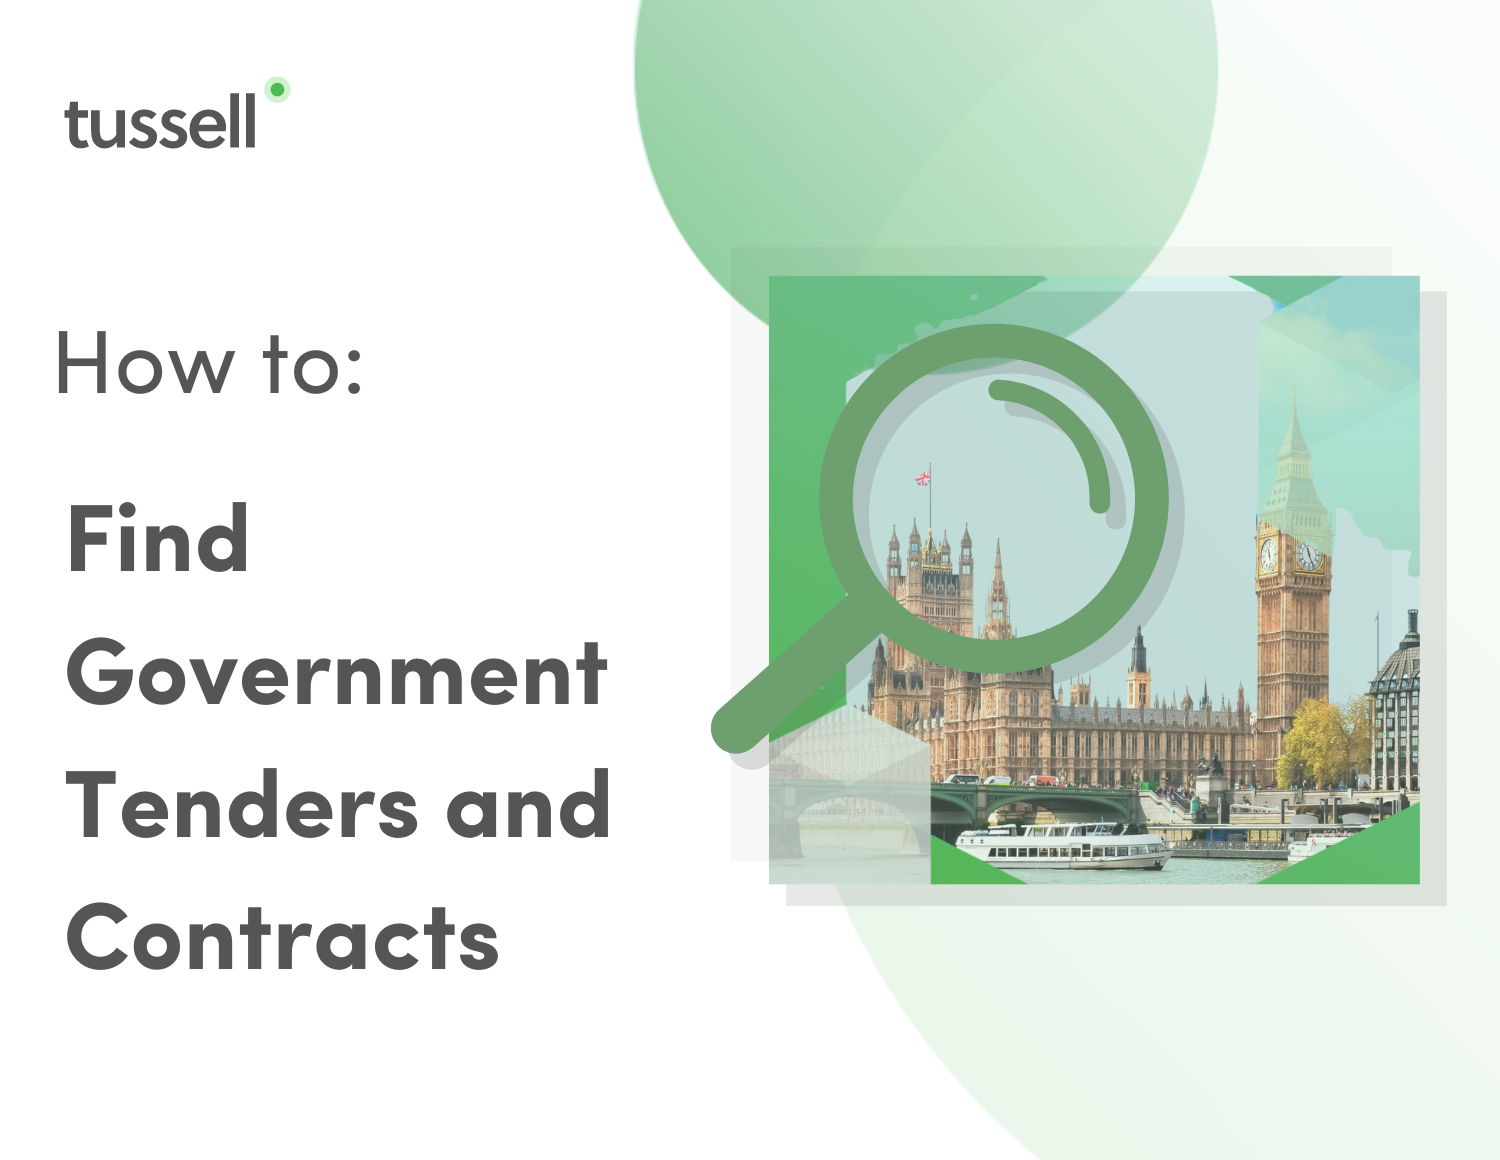 How to find Government contracts (1)